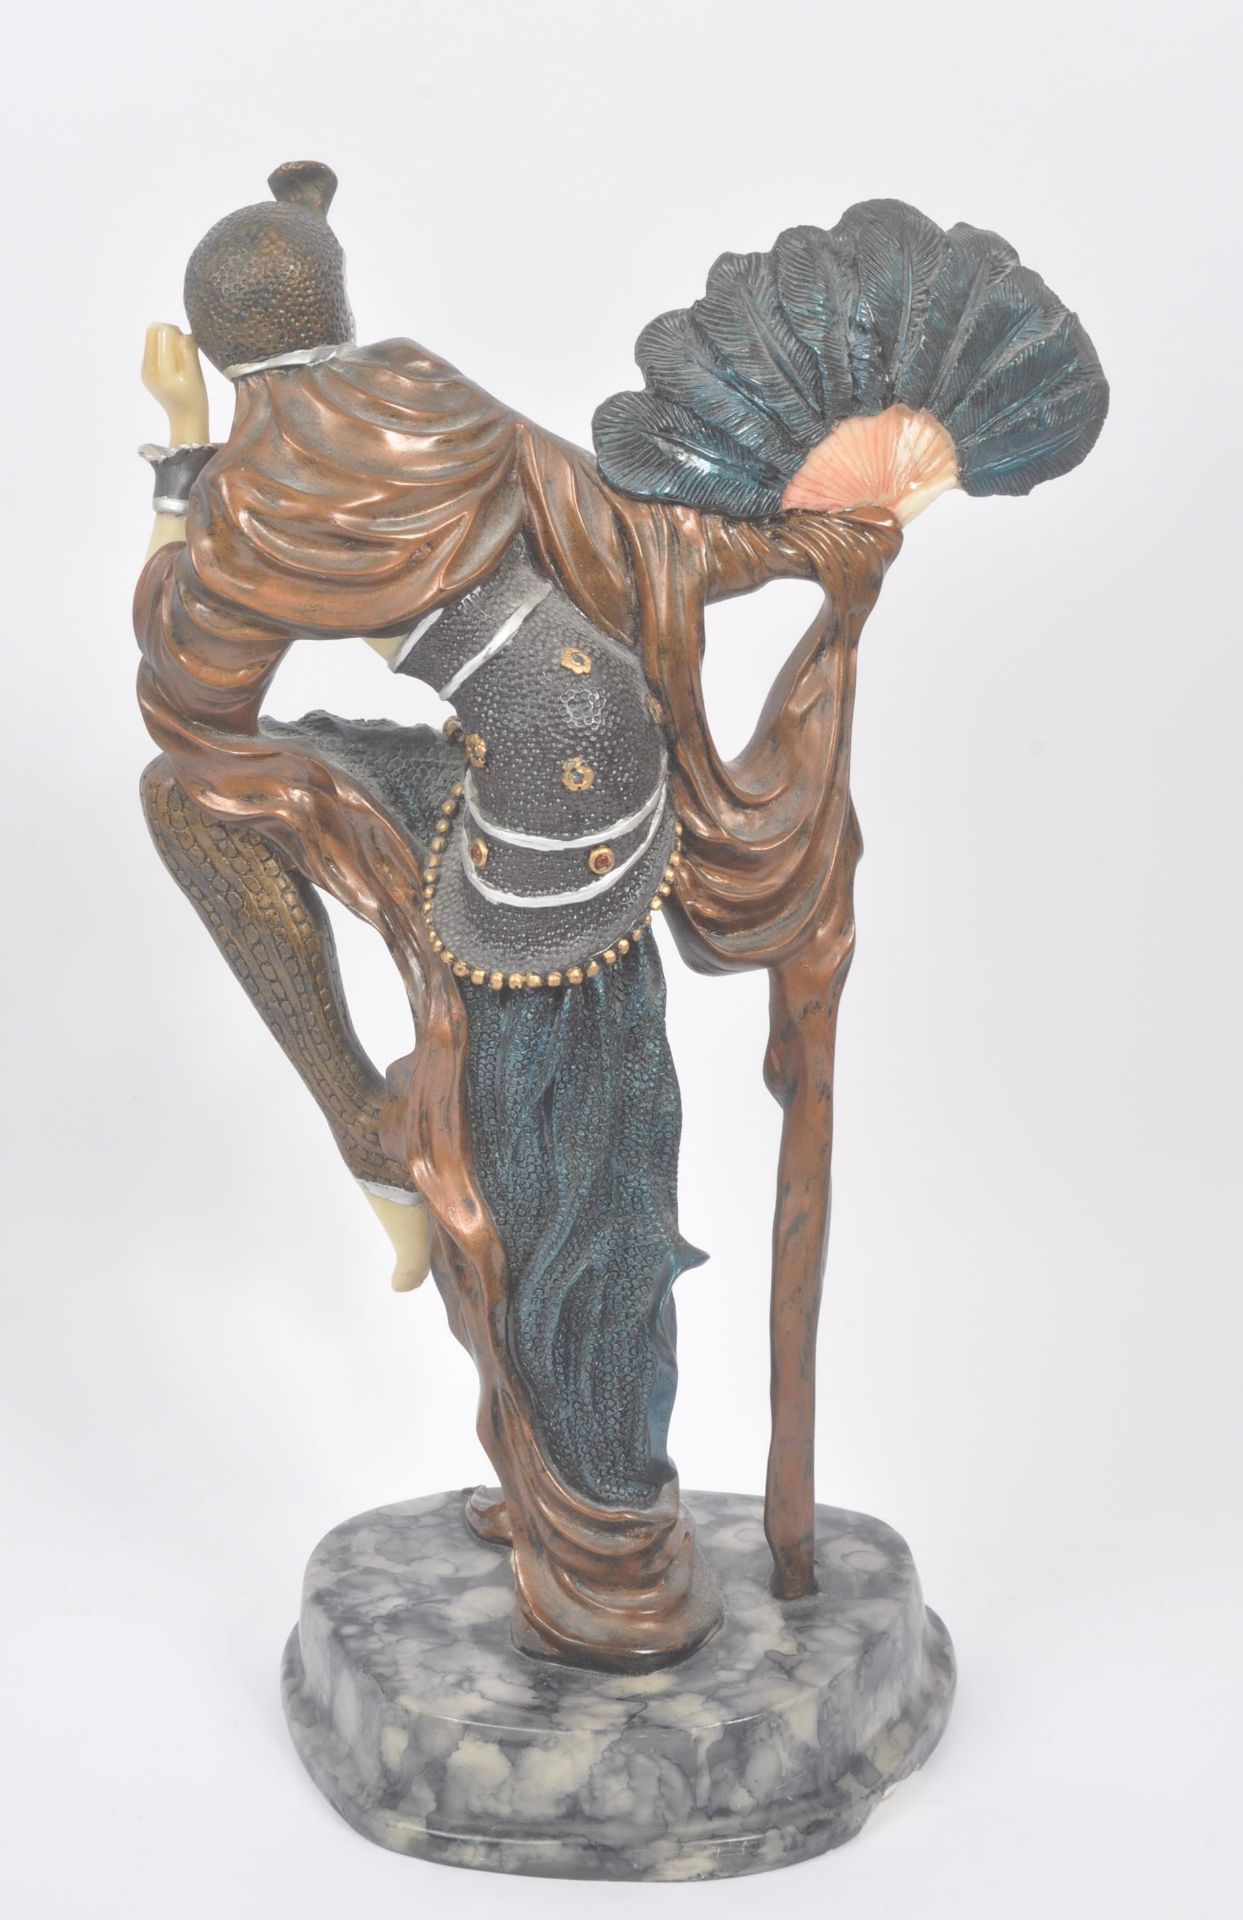 20TH CENTURY DECO STYLE RESIN DANCING FIGURINE - Image 2 of 5